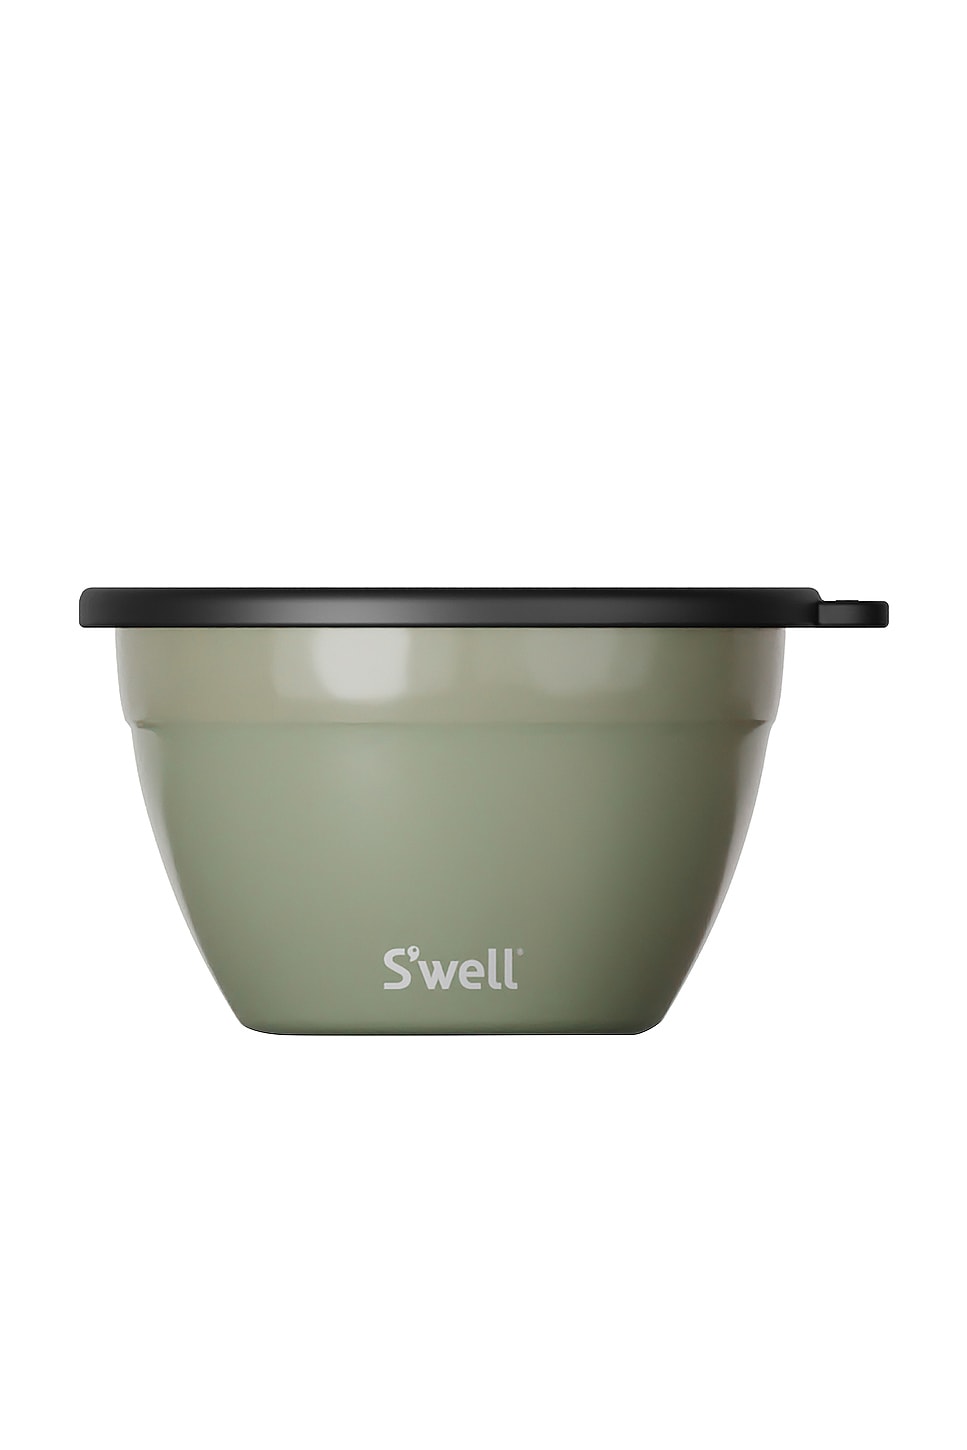 S'well Salad Bowl Kit in Mountain Sage